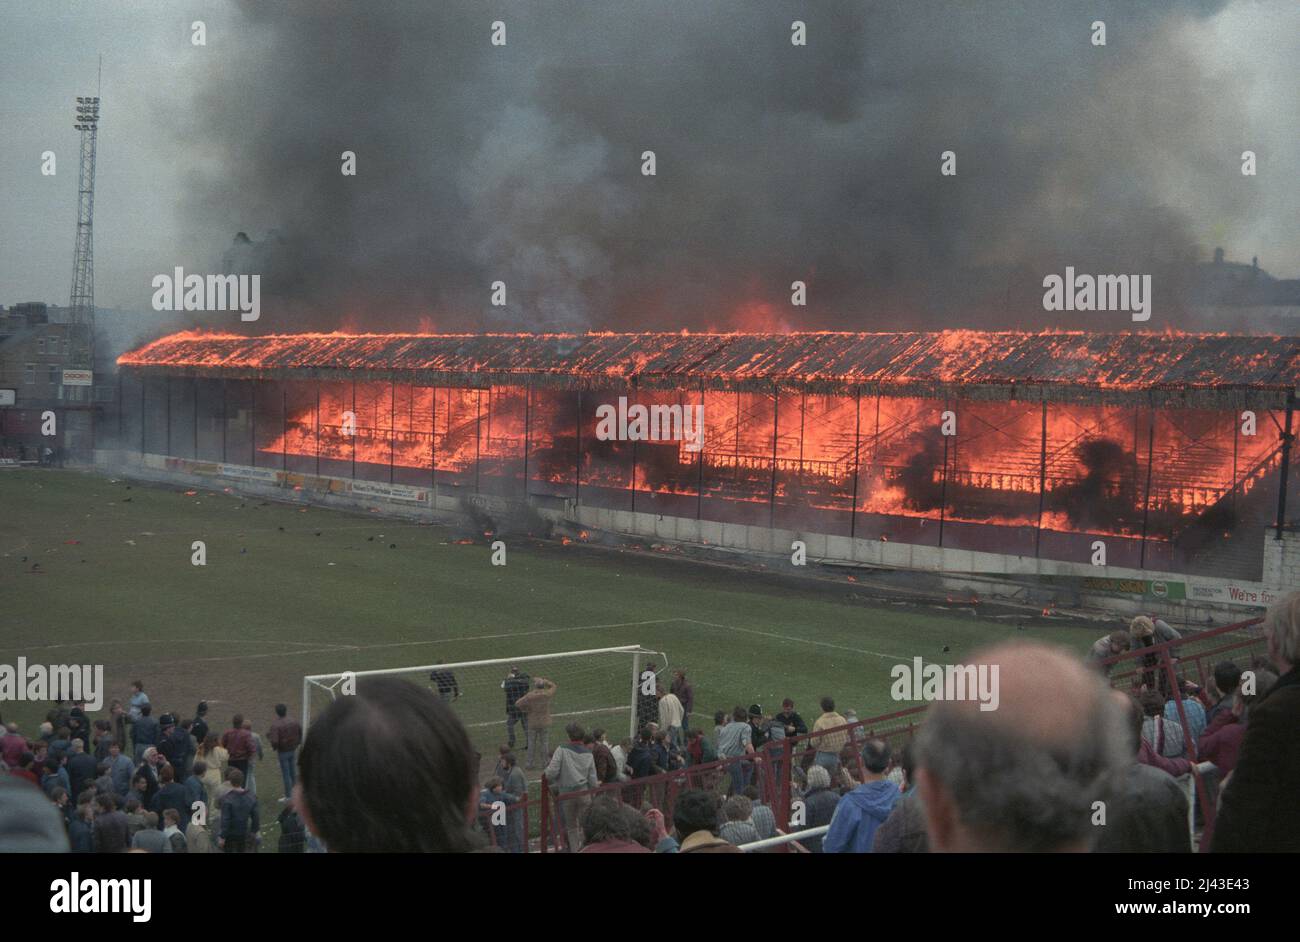 Bradford City Fire Disaster à Valley Parade 1985 Banque D'Images